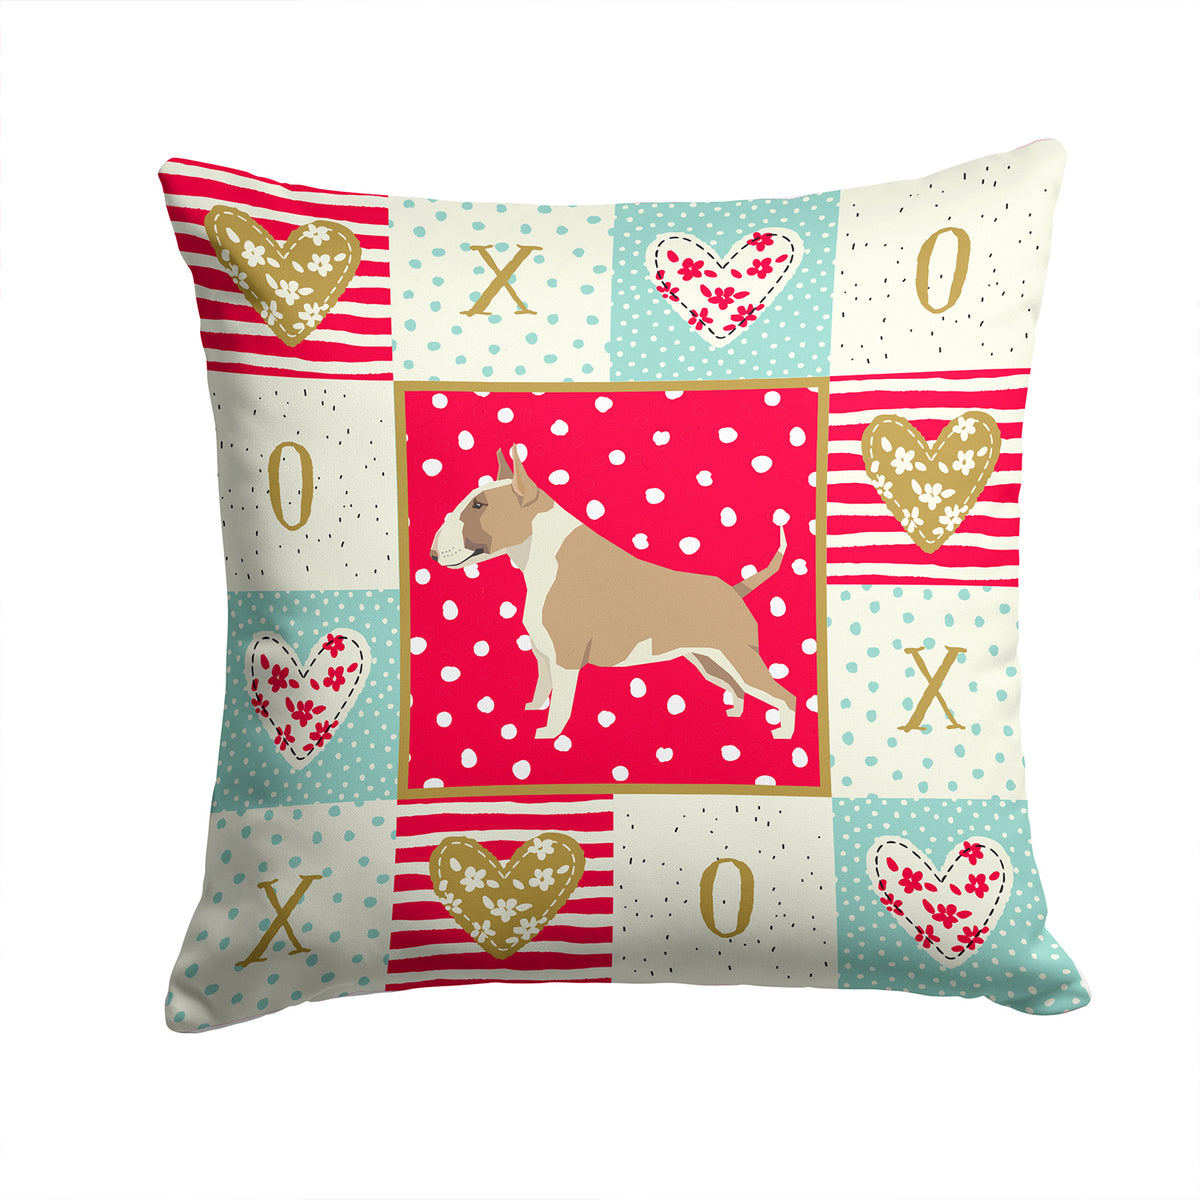 Fawn and White Bull Terrier Love Fabric Decorative Pillow CK5918PW1414 - the-store.com